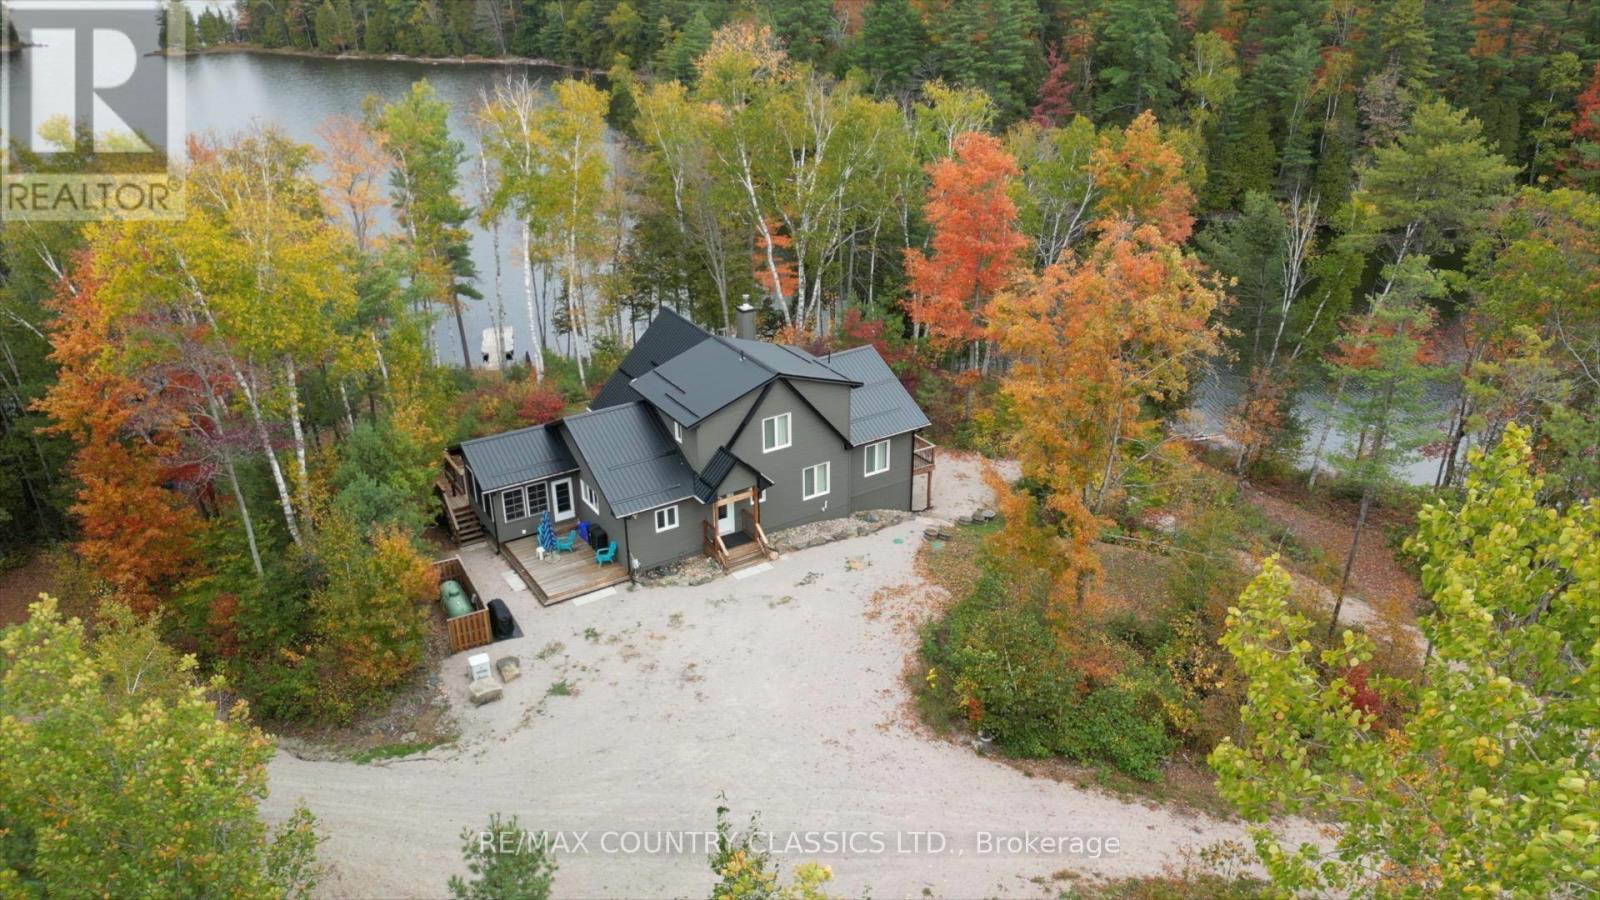 For sale: 414 LAKE OF ISLANDS RD, Marmora and Lake, Ontario K0L1W0 -  X8117712